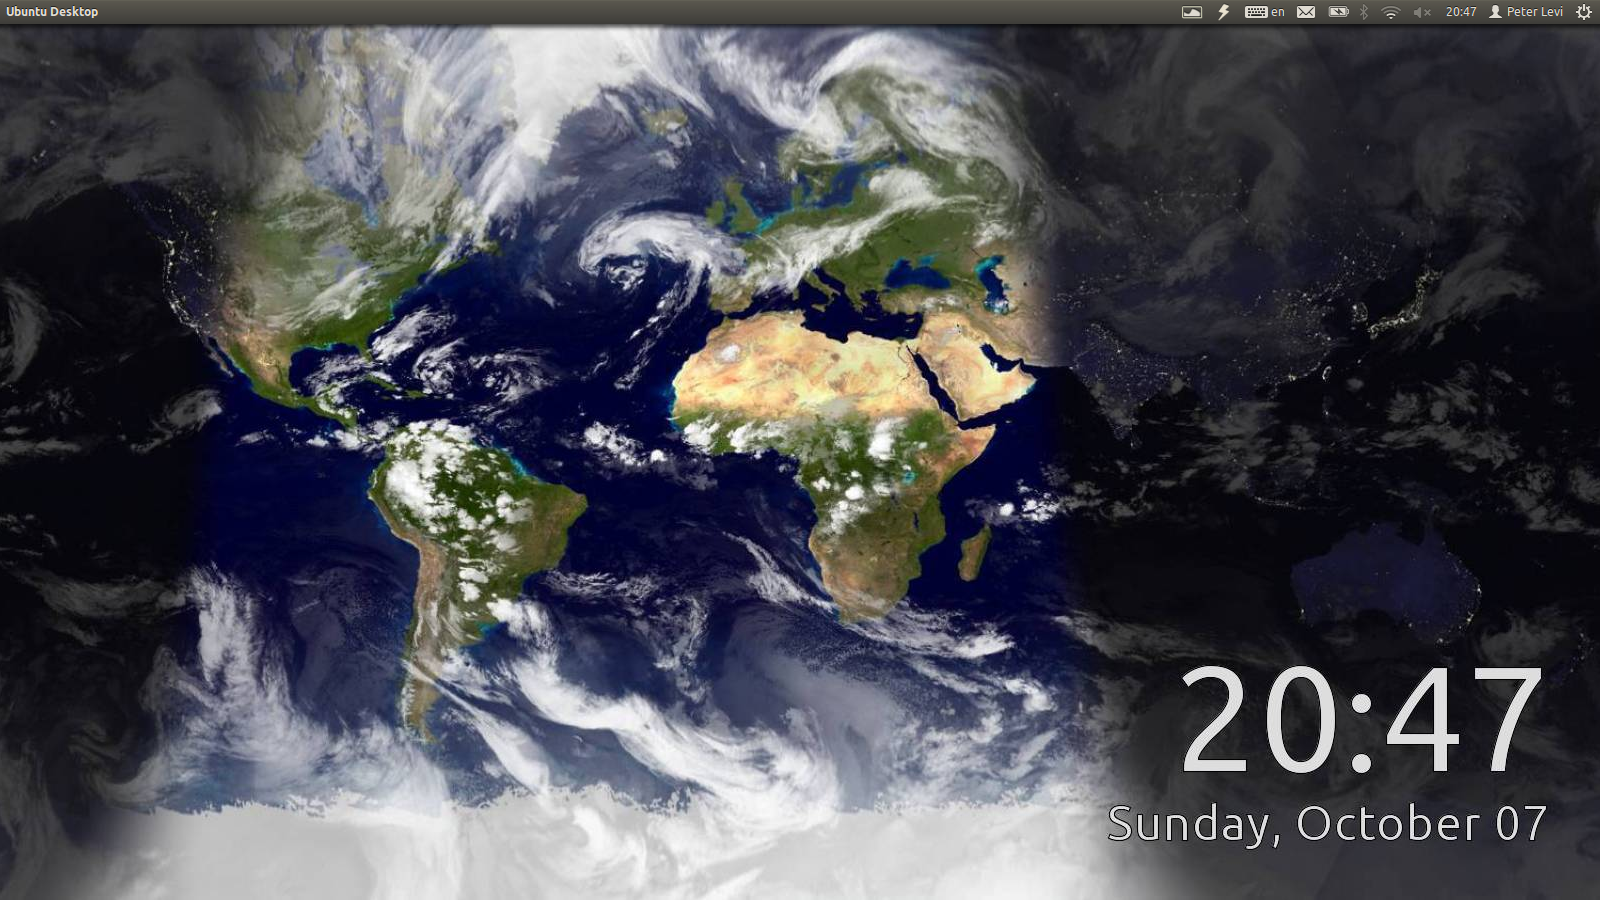 World Sunlight Map is great as a live wallpaper that shows realtime